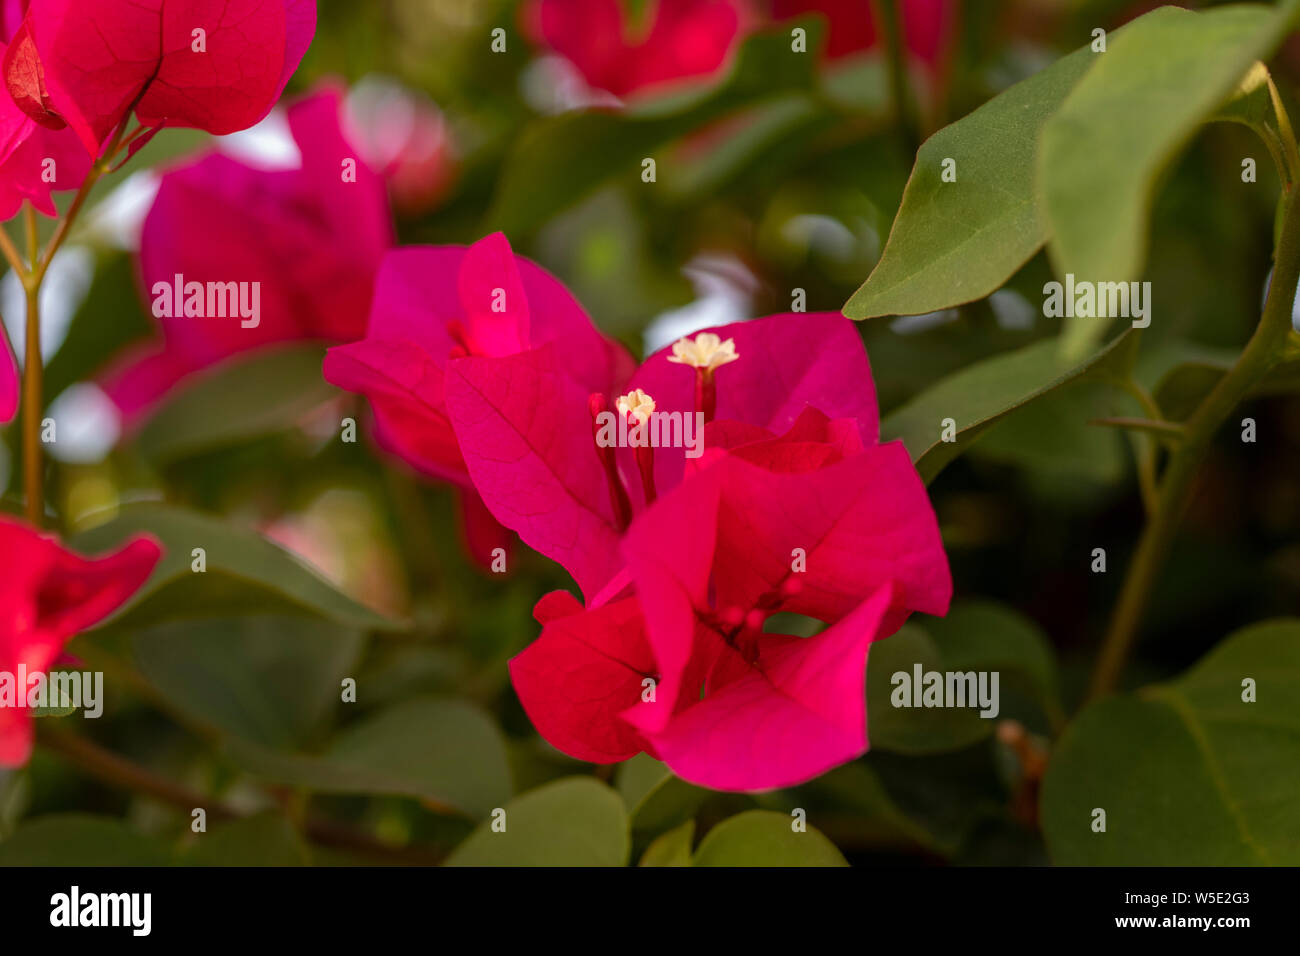 Bougainvillea  flowers in close up Stock Photo